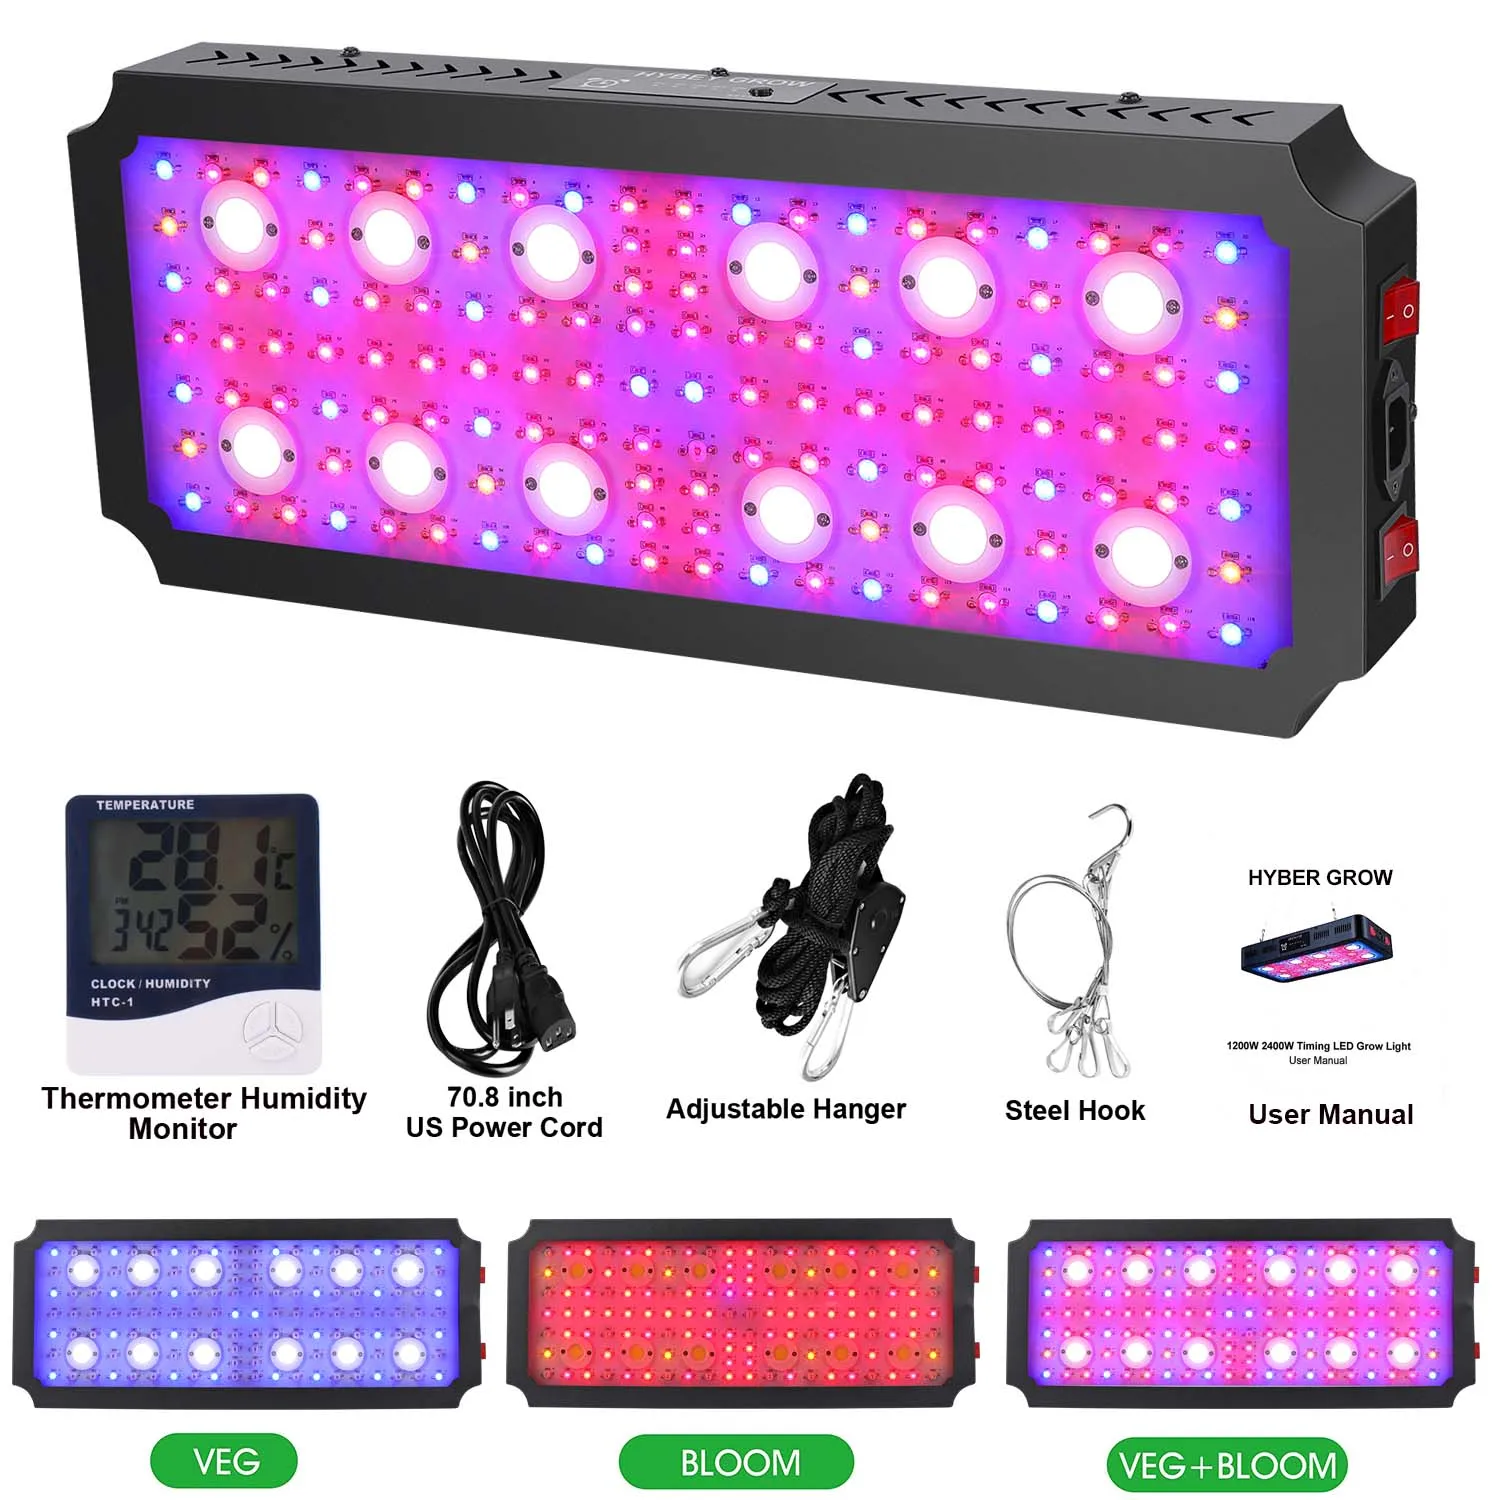 3000W Plant Growing Lamps with Timer Control, Full Spectrum LED Grow Light with VEG and BLOOM Switches for Plants Growth